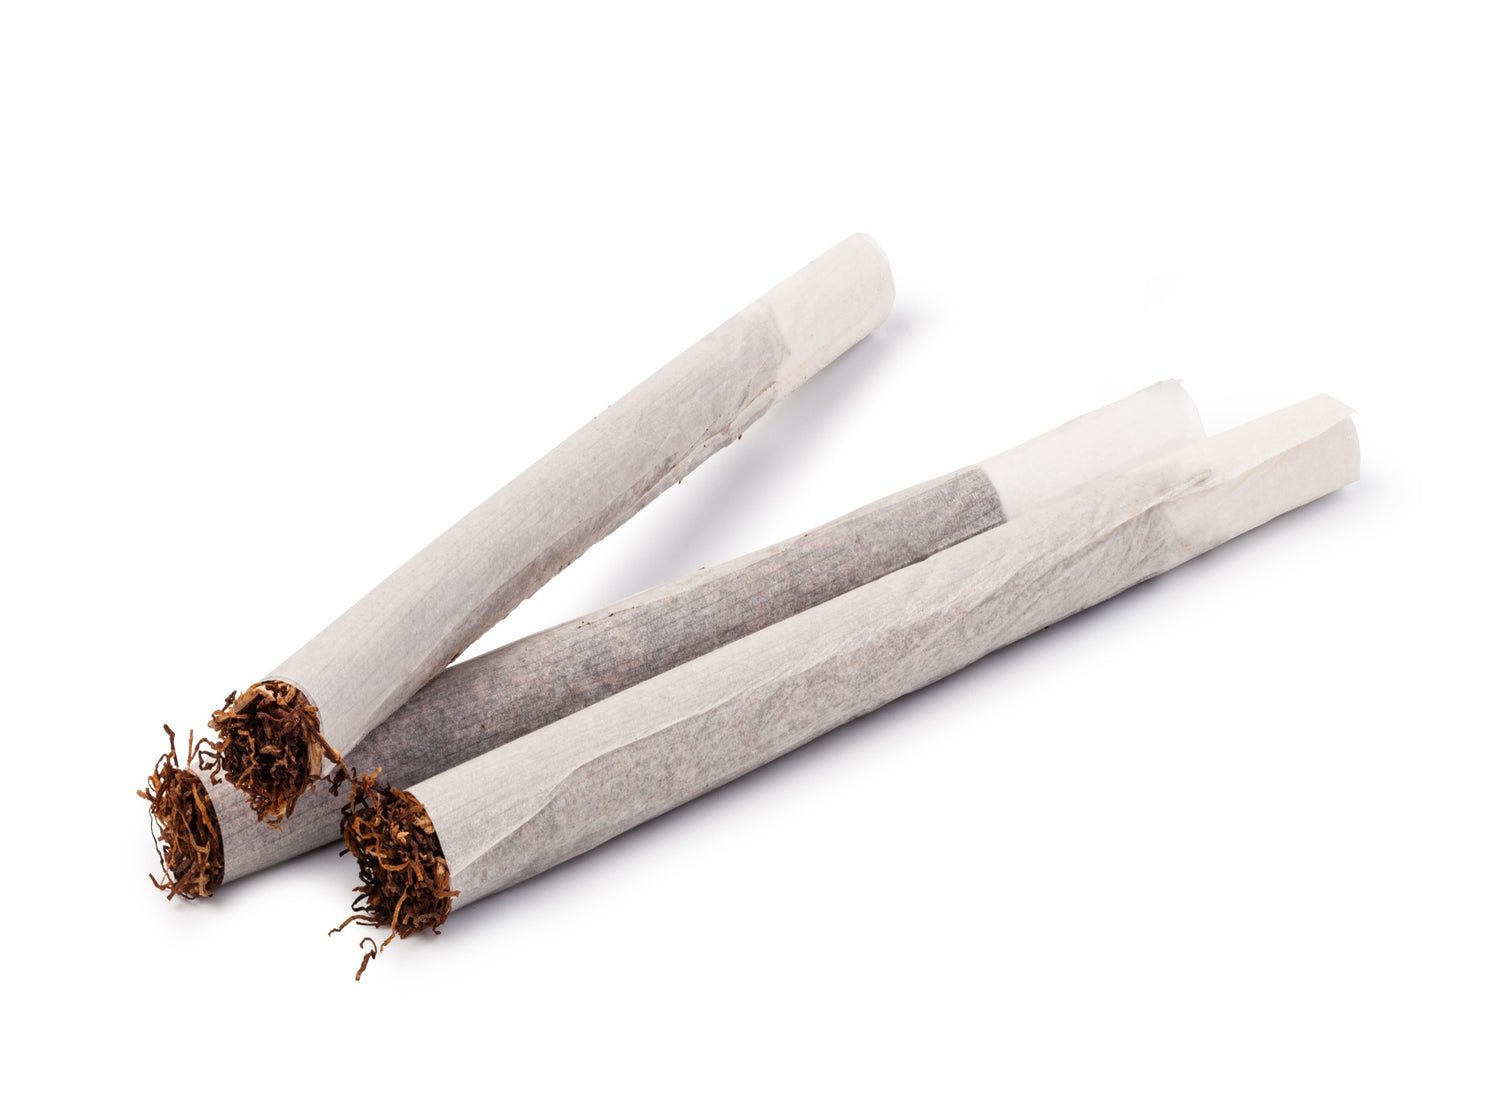 What Are RYO Cigarettes &amp; Joints?